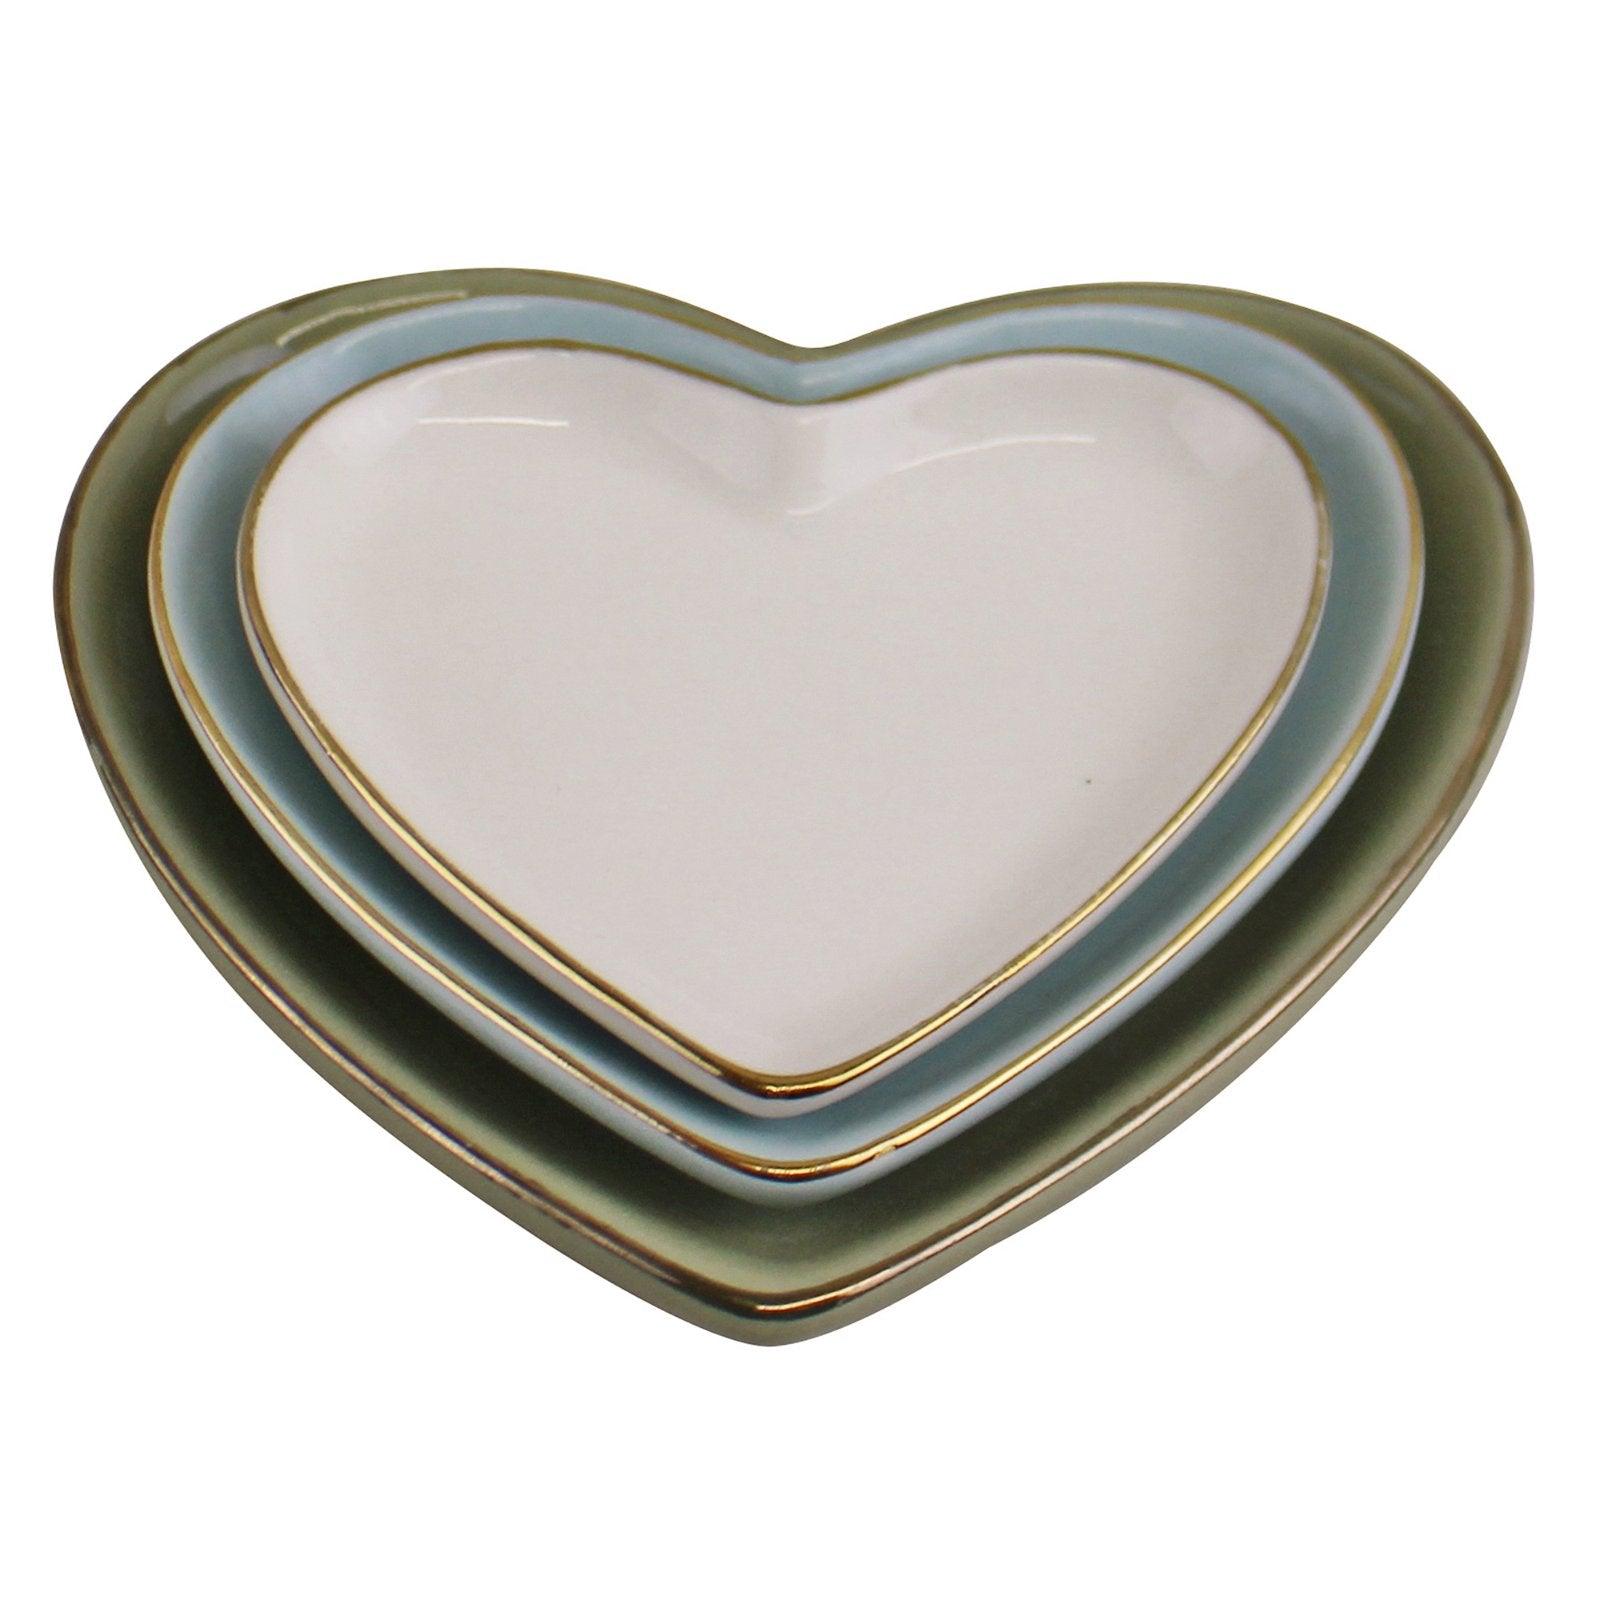 Set Of 3 Heart Shaped Ceramic Trinket Plates With A Gold Edge-Ornaments